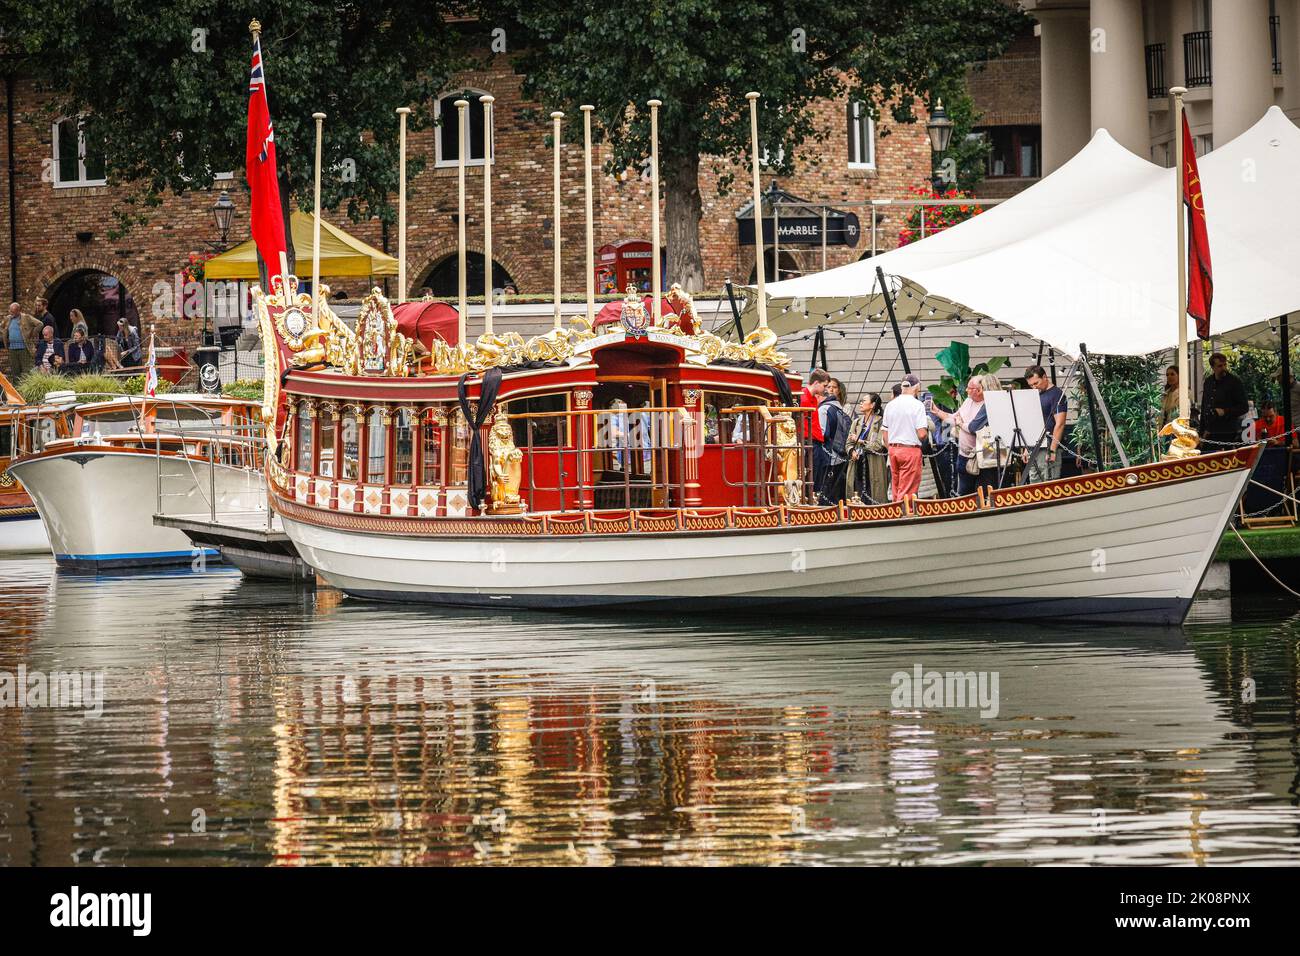 London, UK, 10th Sep 2022. The Gloriana in her 'mourning dress', with black cloth ribbons wrapped around the ornamental golden lions. Gloriana, the Queen's Rowbarge, is this weekend moored in St Katherine Docks for the boat festival. The Royal Rowbarge was built as a tribute to and lasting legacy for Queen Elizabeth's Diamond Jubilee in 2012, named 'Gloriana' by Her Majesty, and led the Thames Diamond Jubilee Pageant, as well as other occasions since then. The barge may play a role in next week's proceedings around the funeral procession, but this is as yet unconfirmed. Credit: Imageplotter Stock Photo